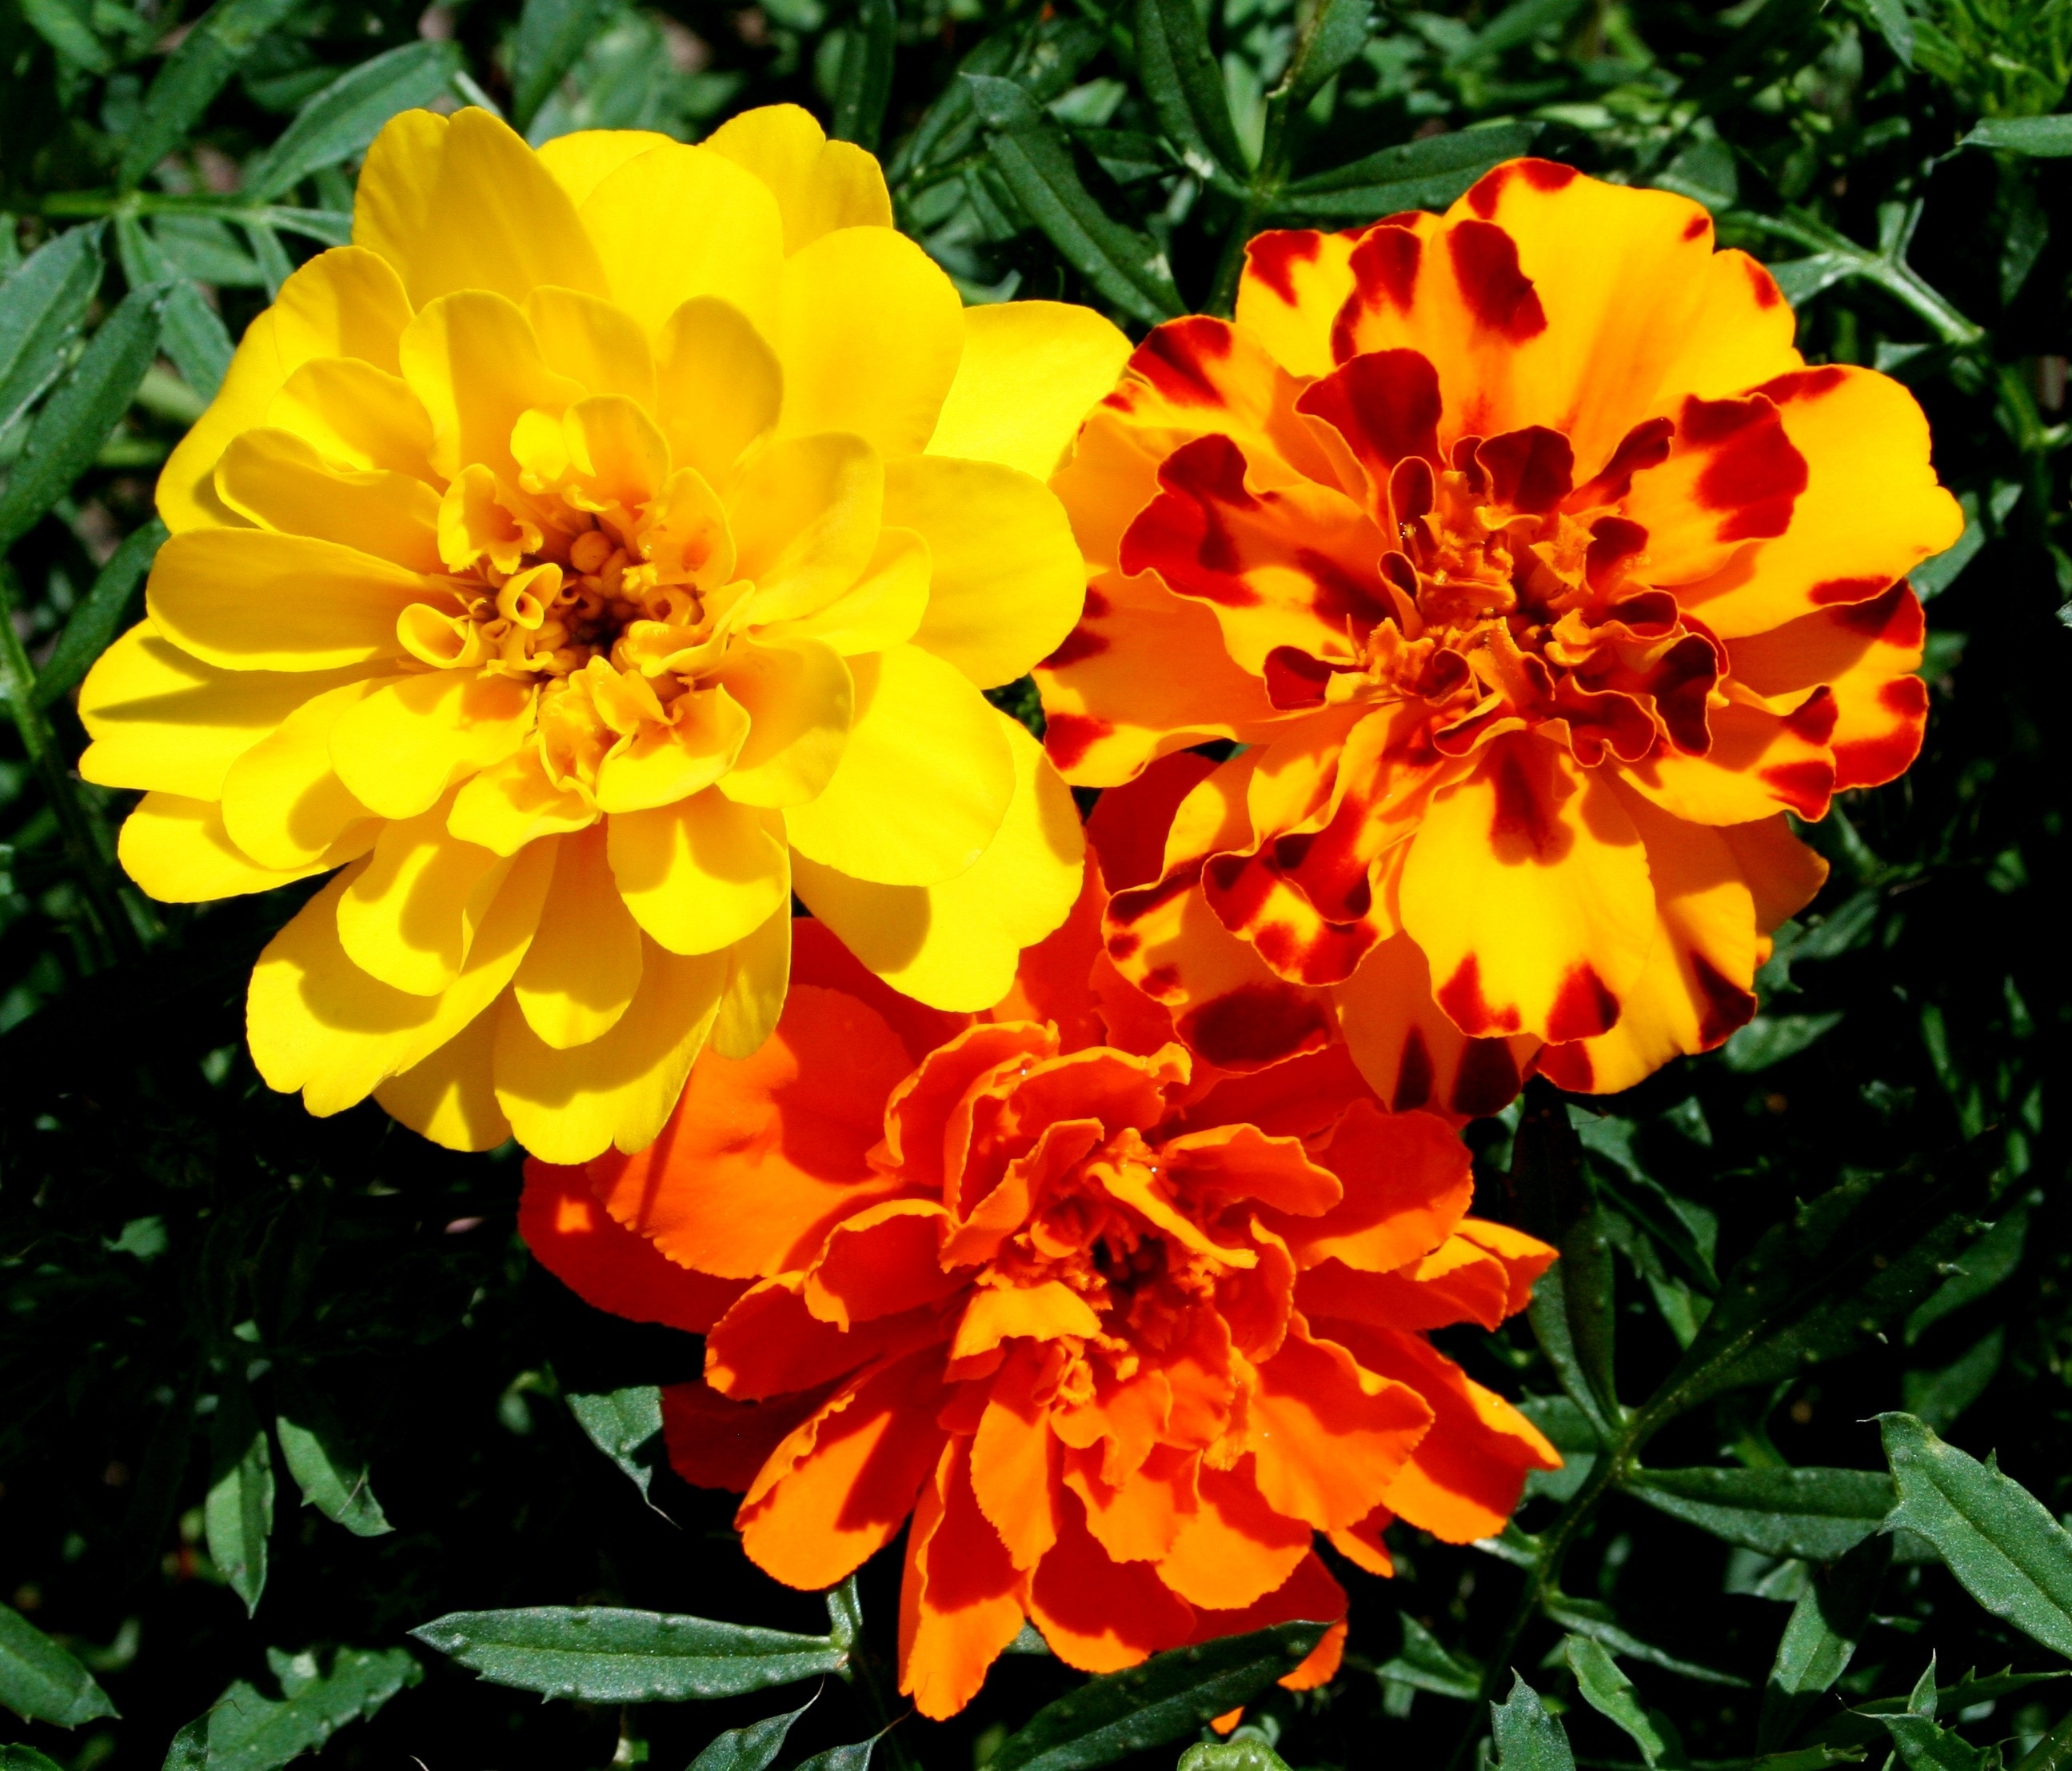 yellow and red multi petaled flowers